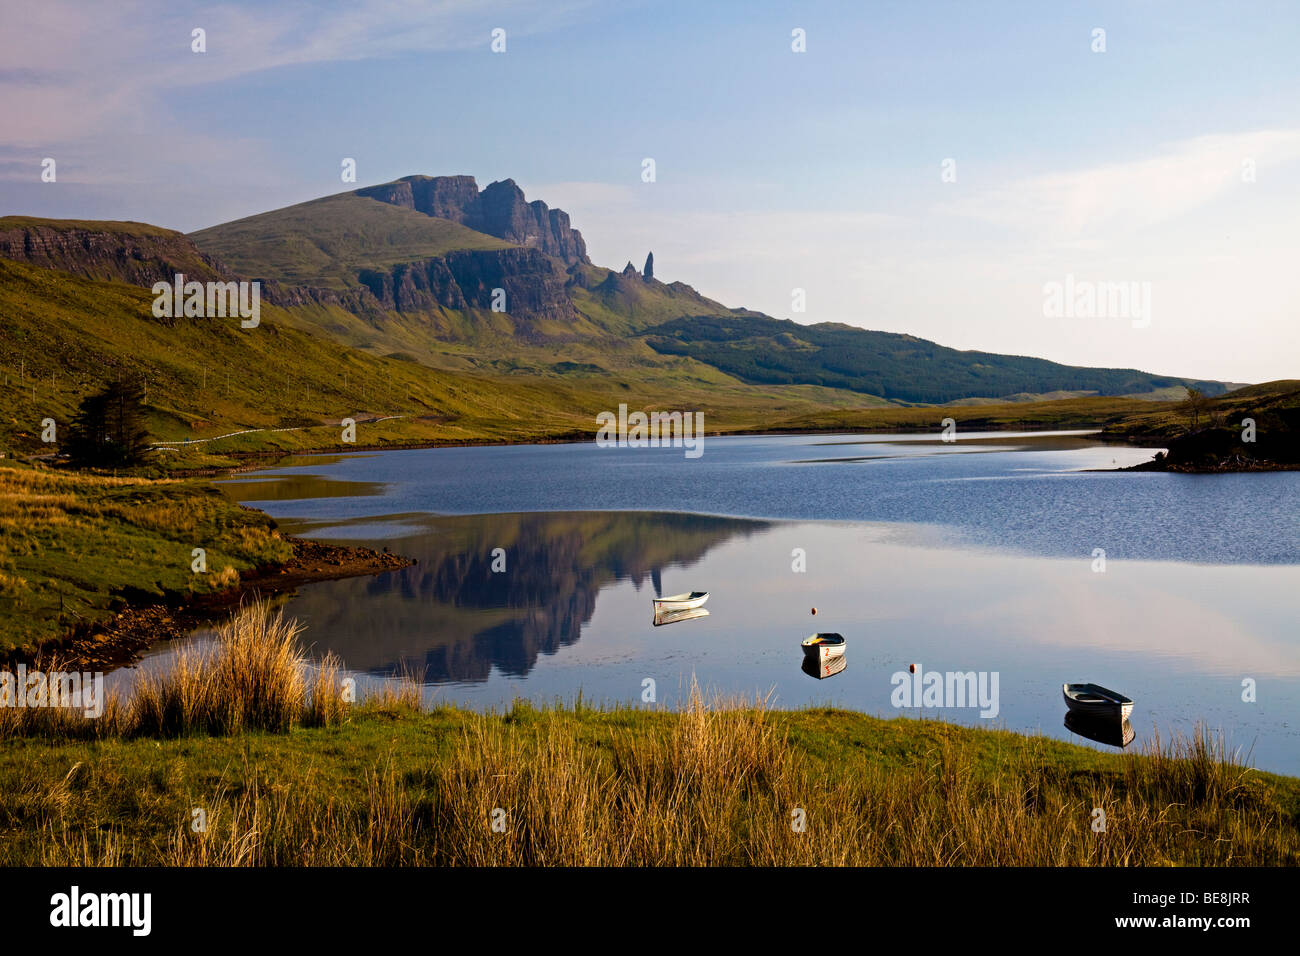 Rowing boats on Loch Fada with Old Man of Storr in background Isle of Skye, Inner Hebrides, Scotland, UK, Europe Stock Photo